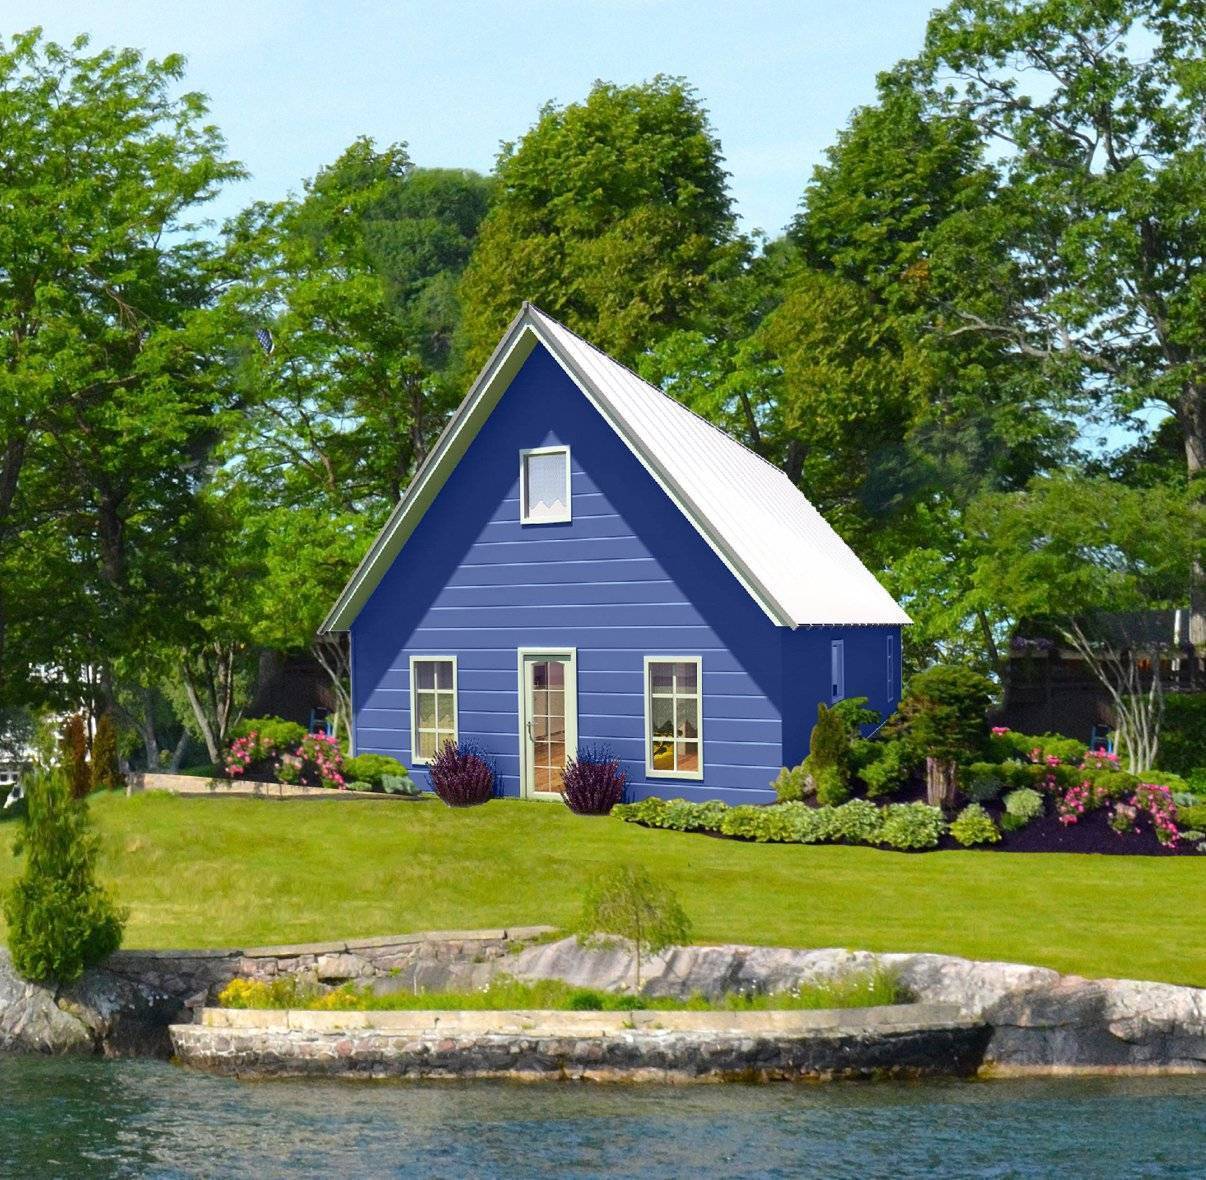 An artist's rendering of an MSH Cottage